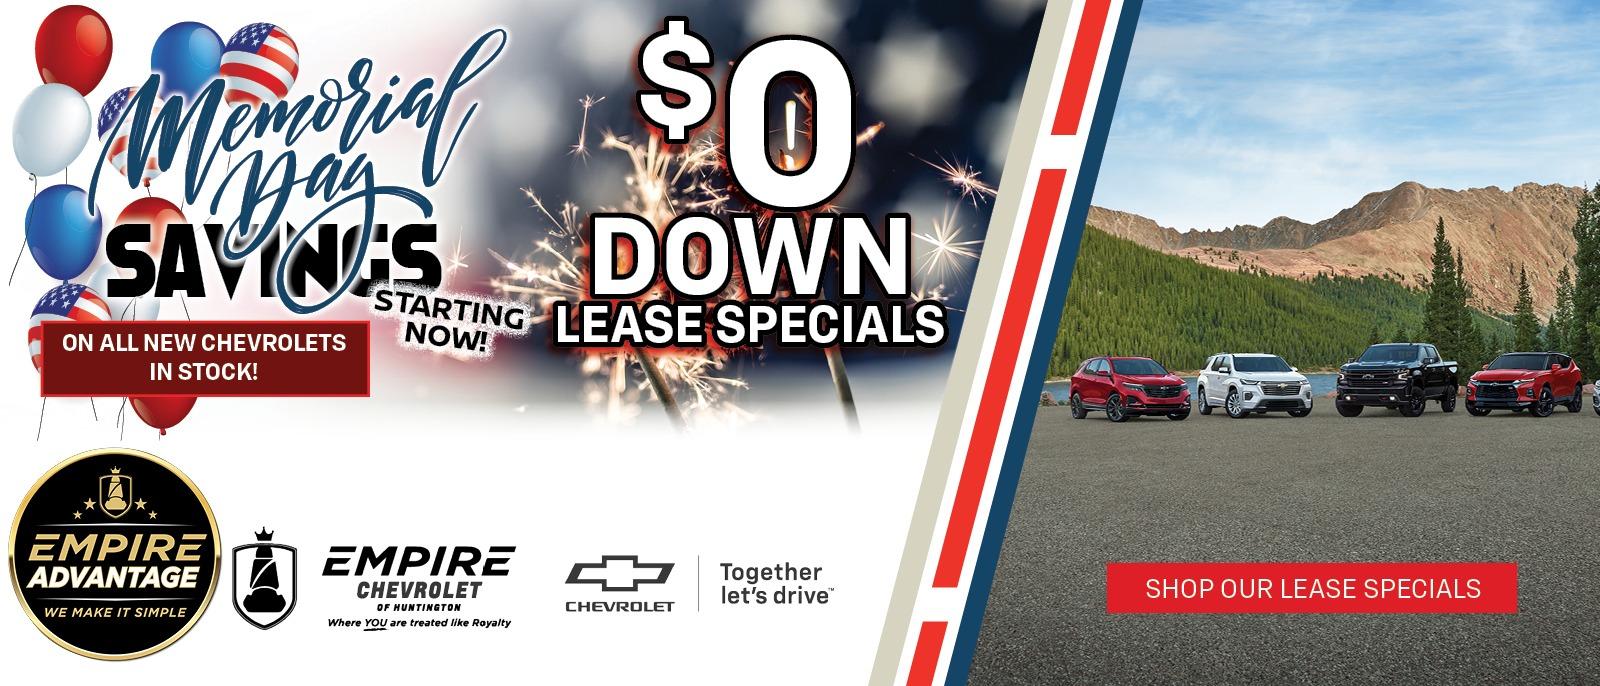 $0 Down Lease Specials